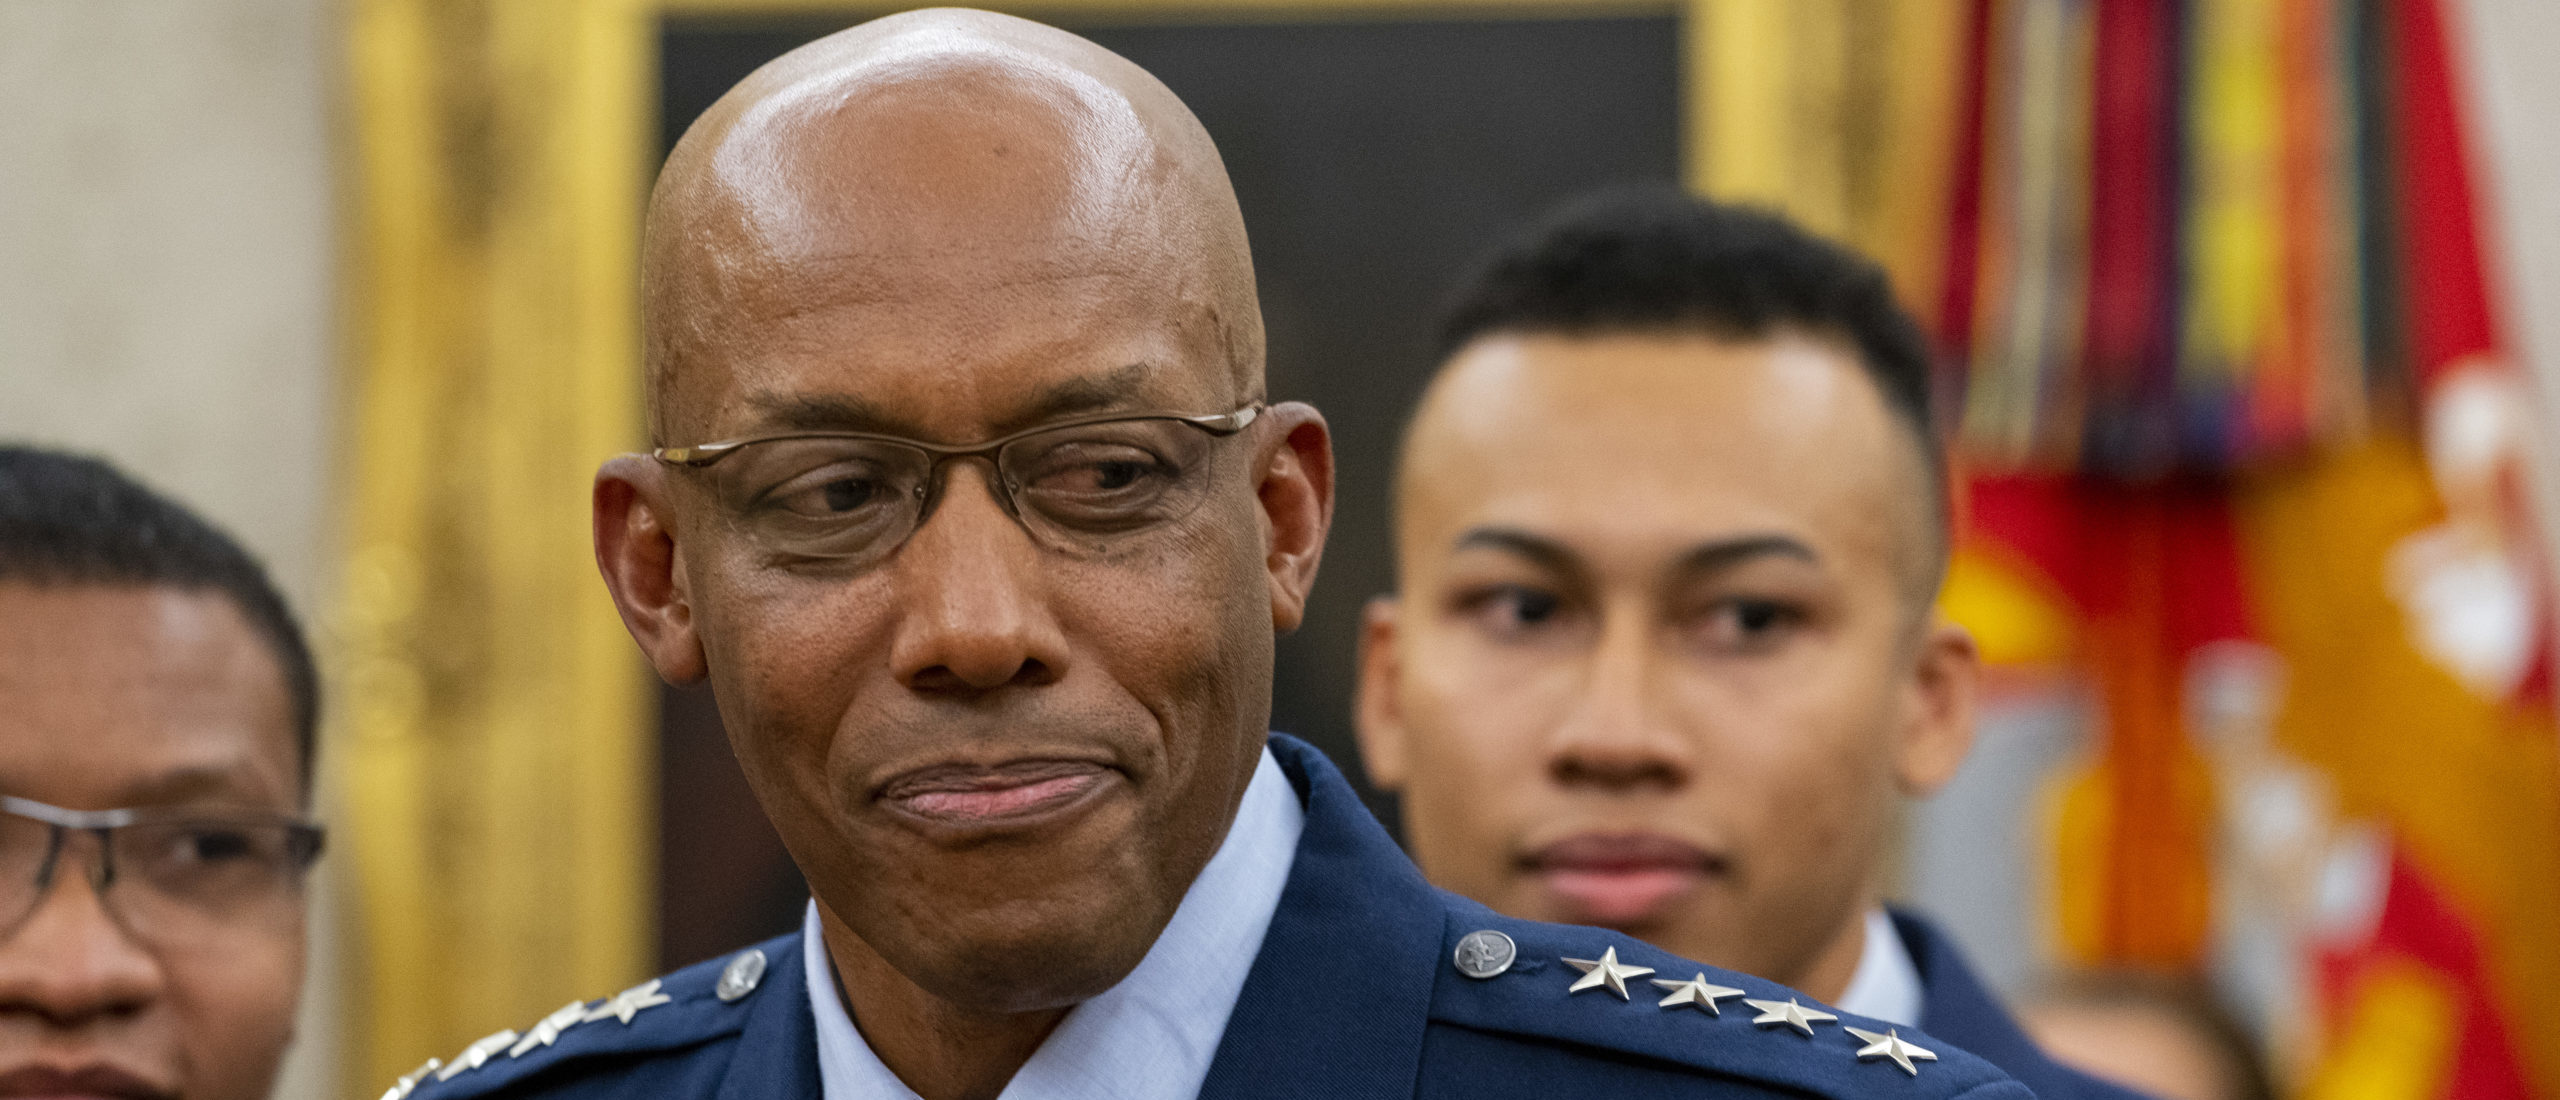 ‘Accelerate Change’: Biden Nearing Pick Of First Black Air Force Chief Of Staff As Joint Chiefs Chairman: REPORT